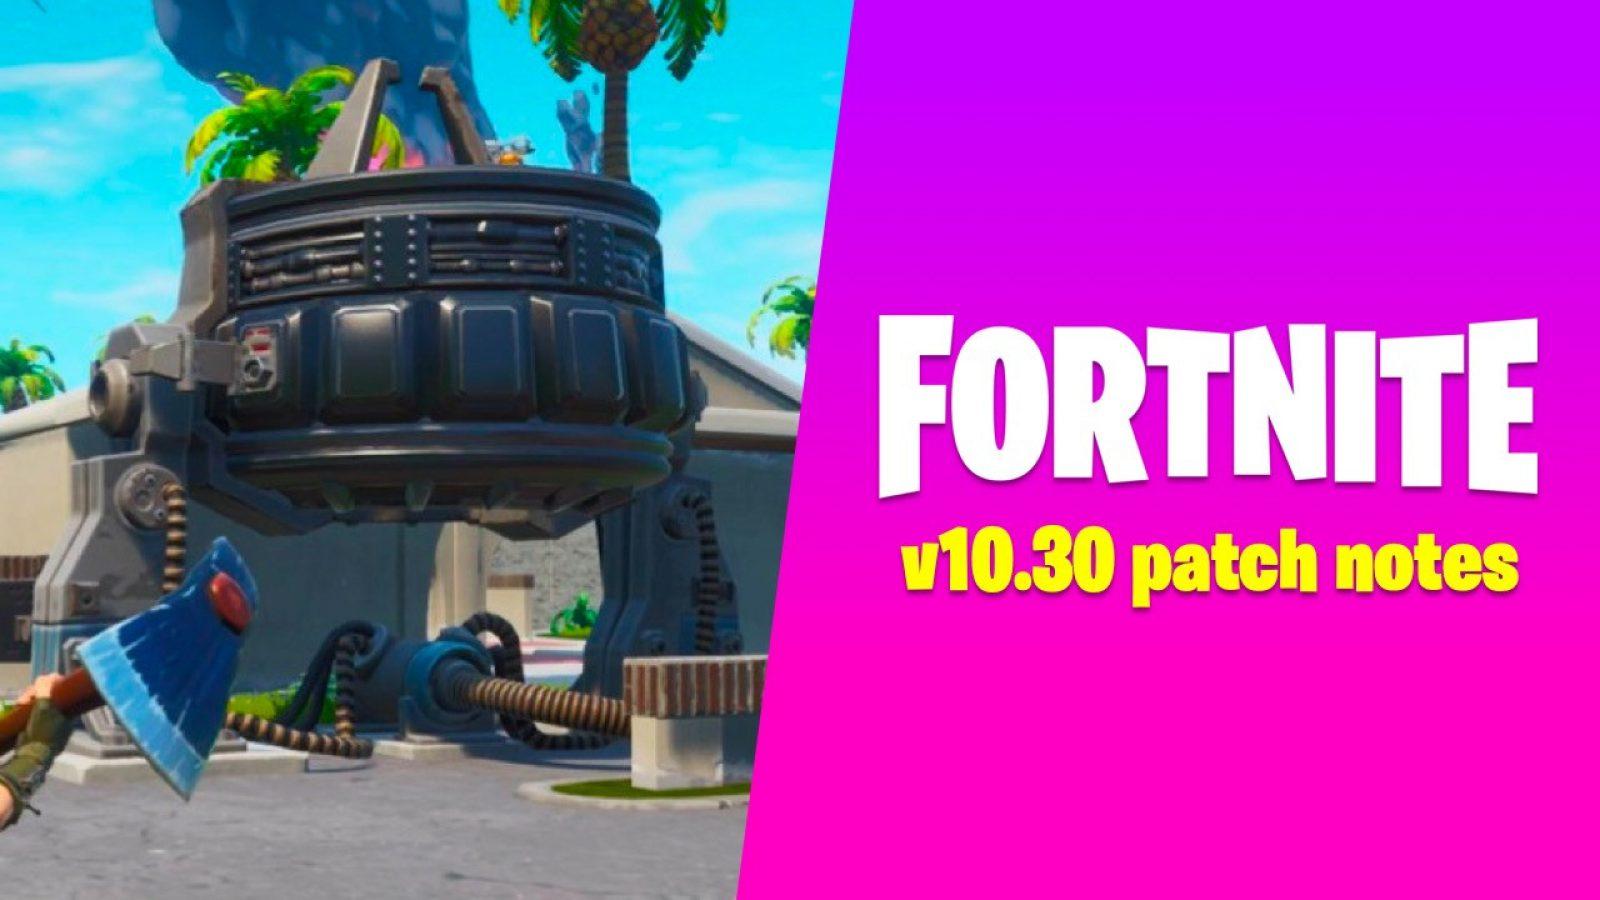 Fortnite x Minecraft merge in new live event created by fan